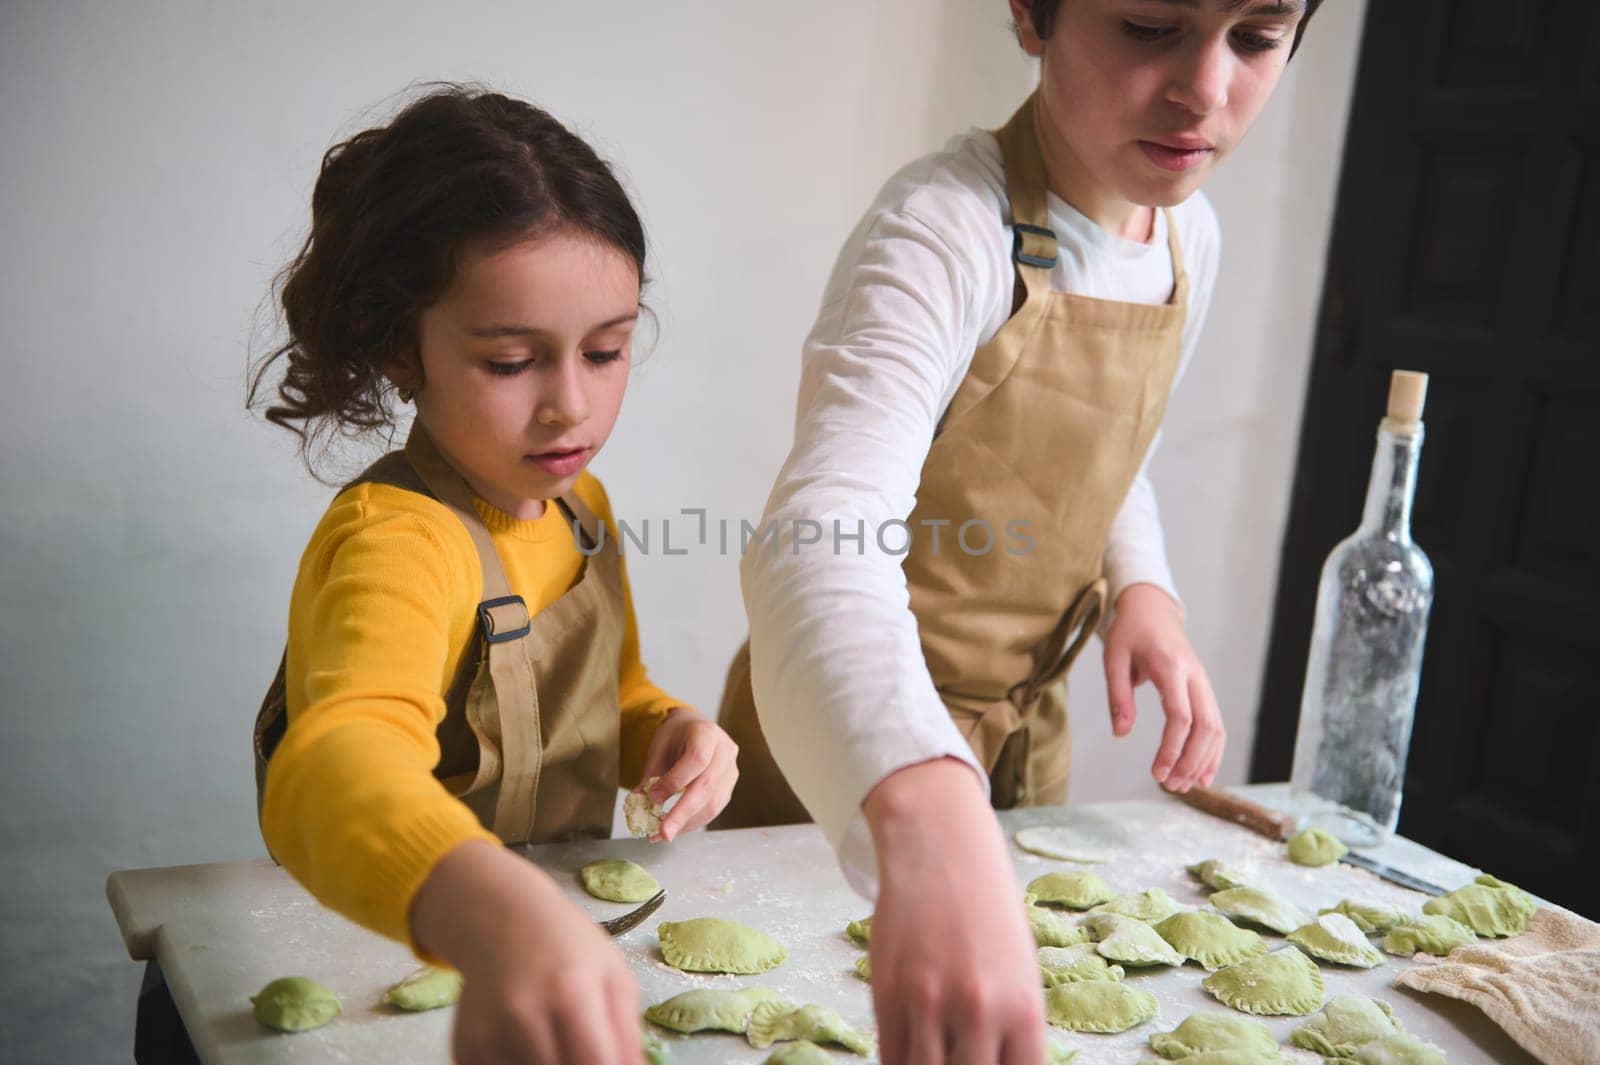 Lovely boy and girl making dumplings, standing at floured kitchen table in the rustic kitchen interior. Cooking class for kids. Preparing ravioli, pelmeni, varennyky according to traditional recipe